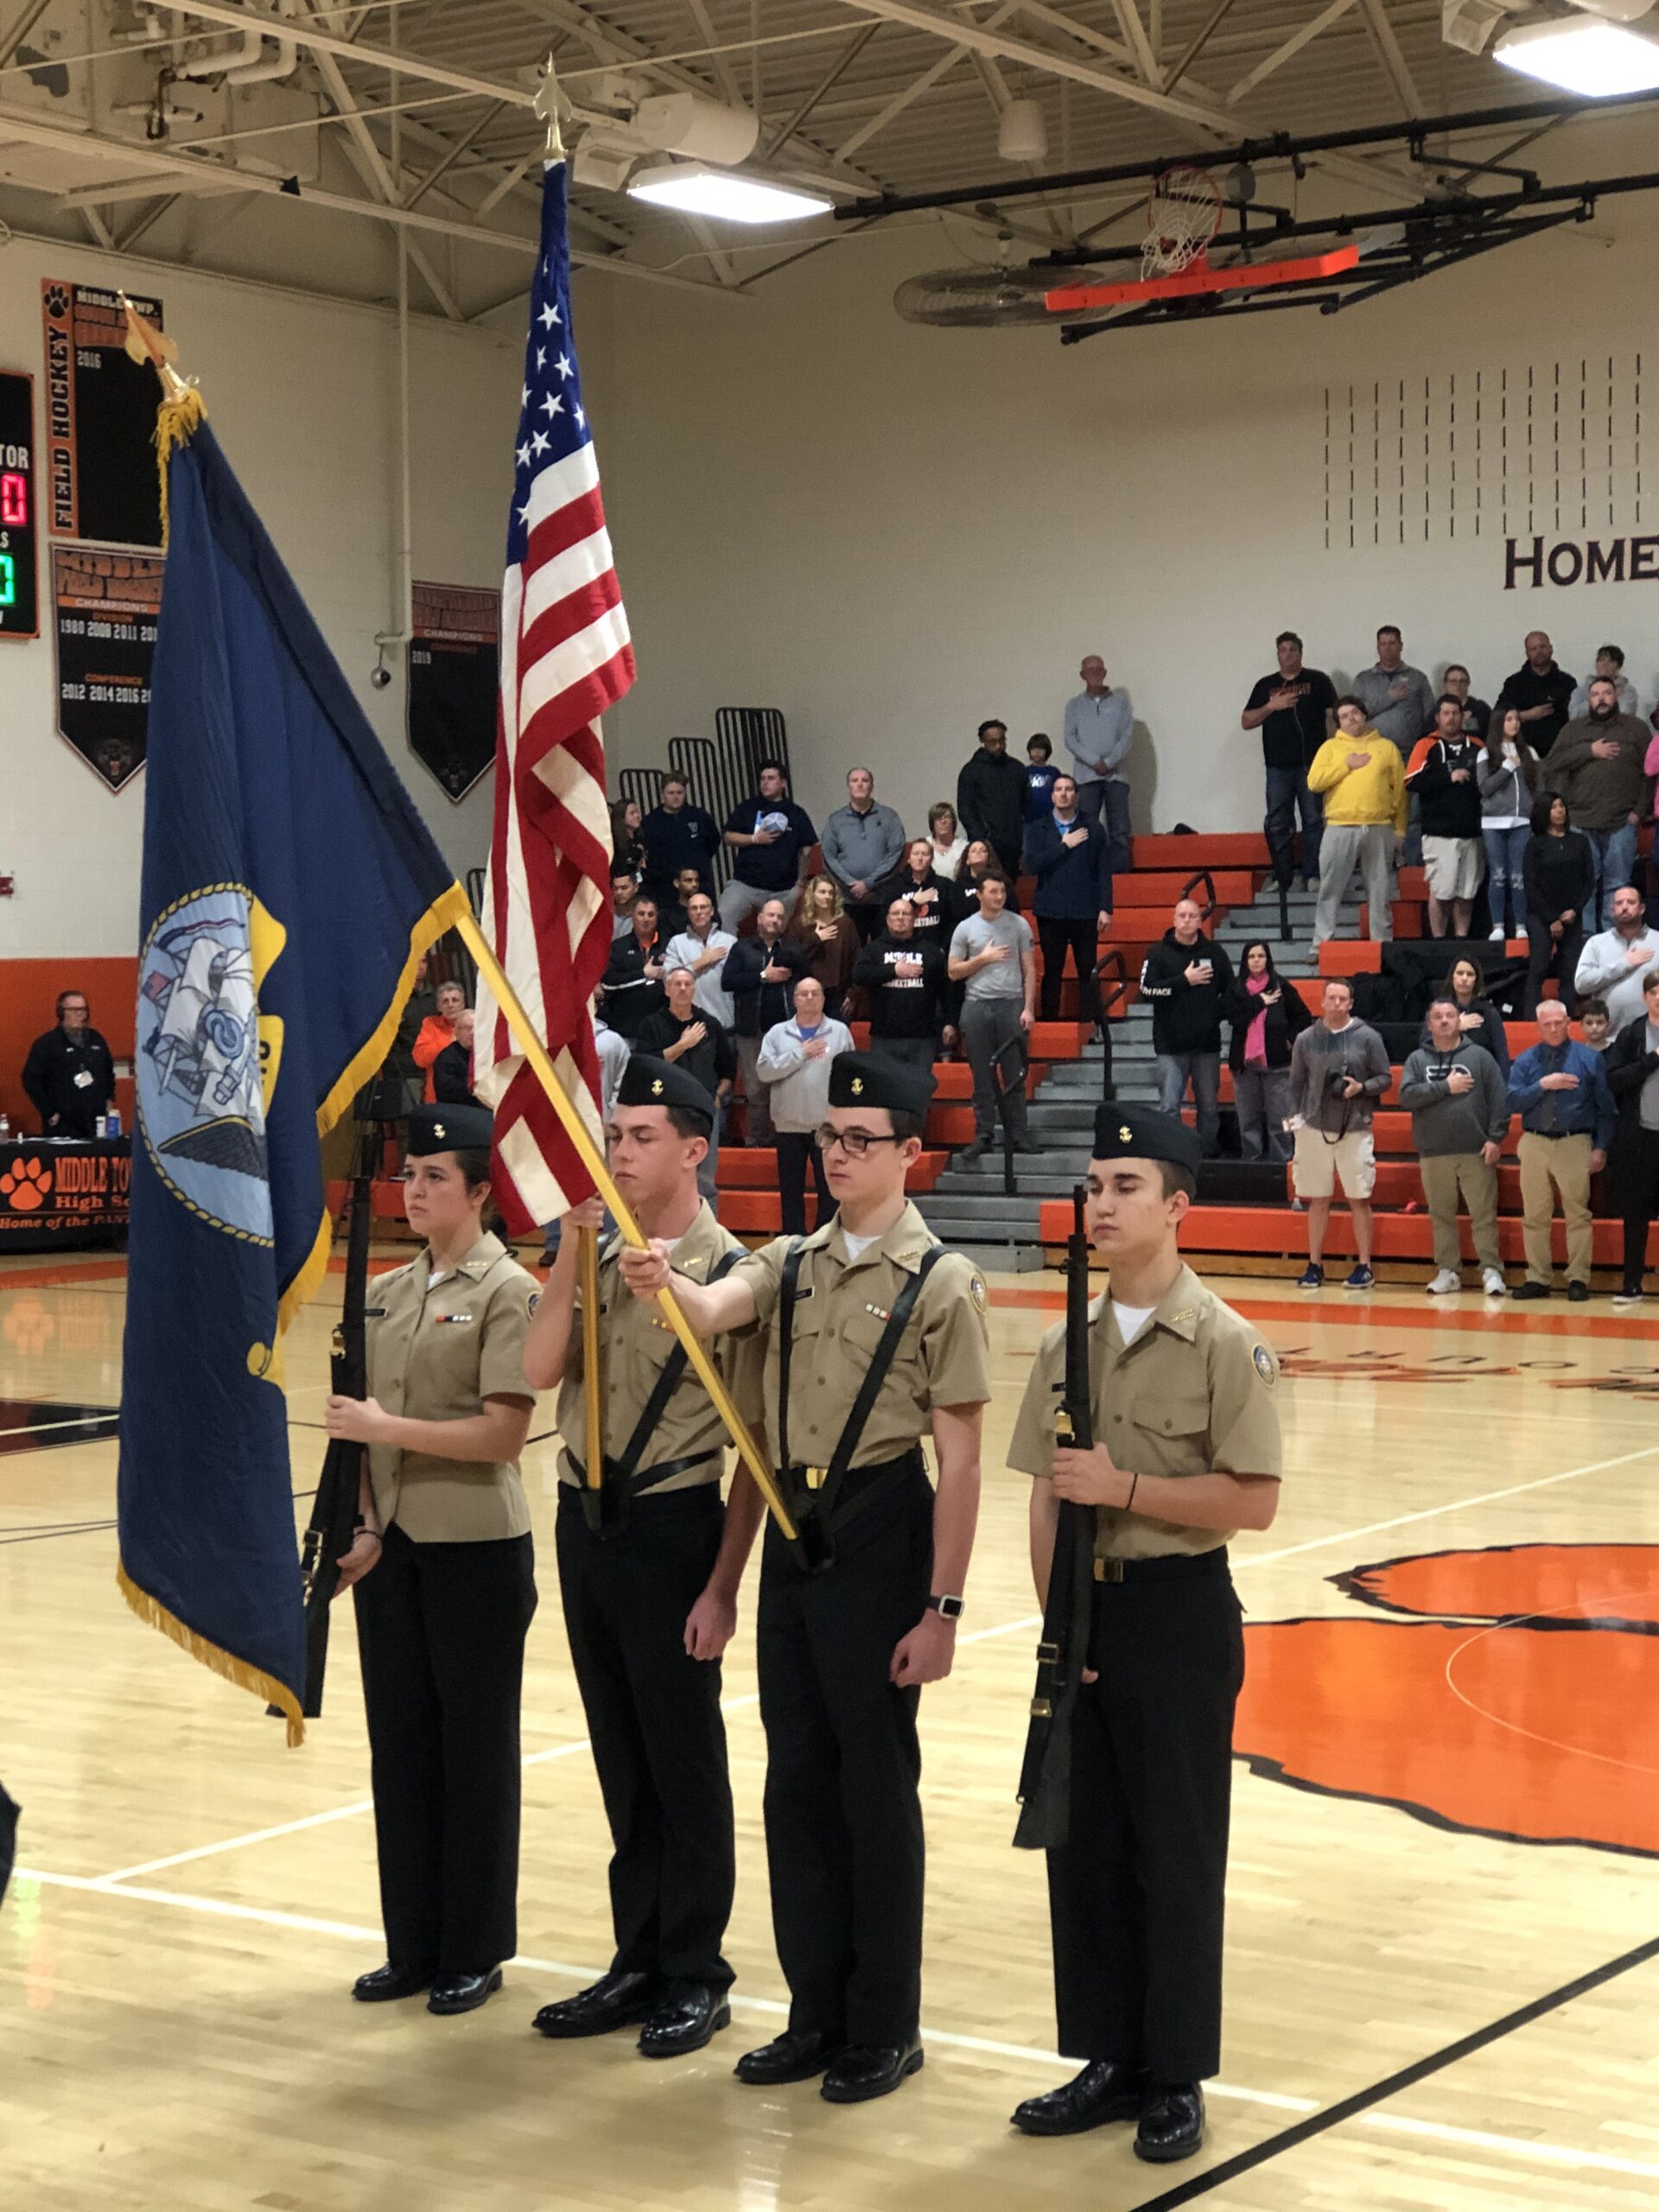 MTHS NNDCC Color Guard Team displaying the American Flag and the State Flag during a sporting event